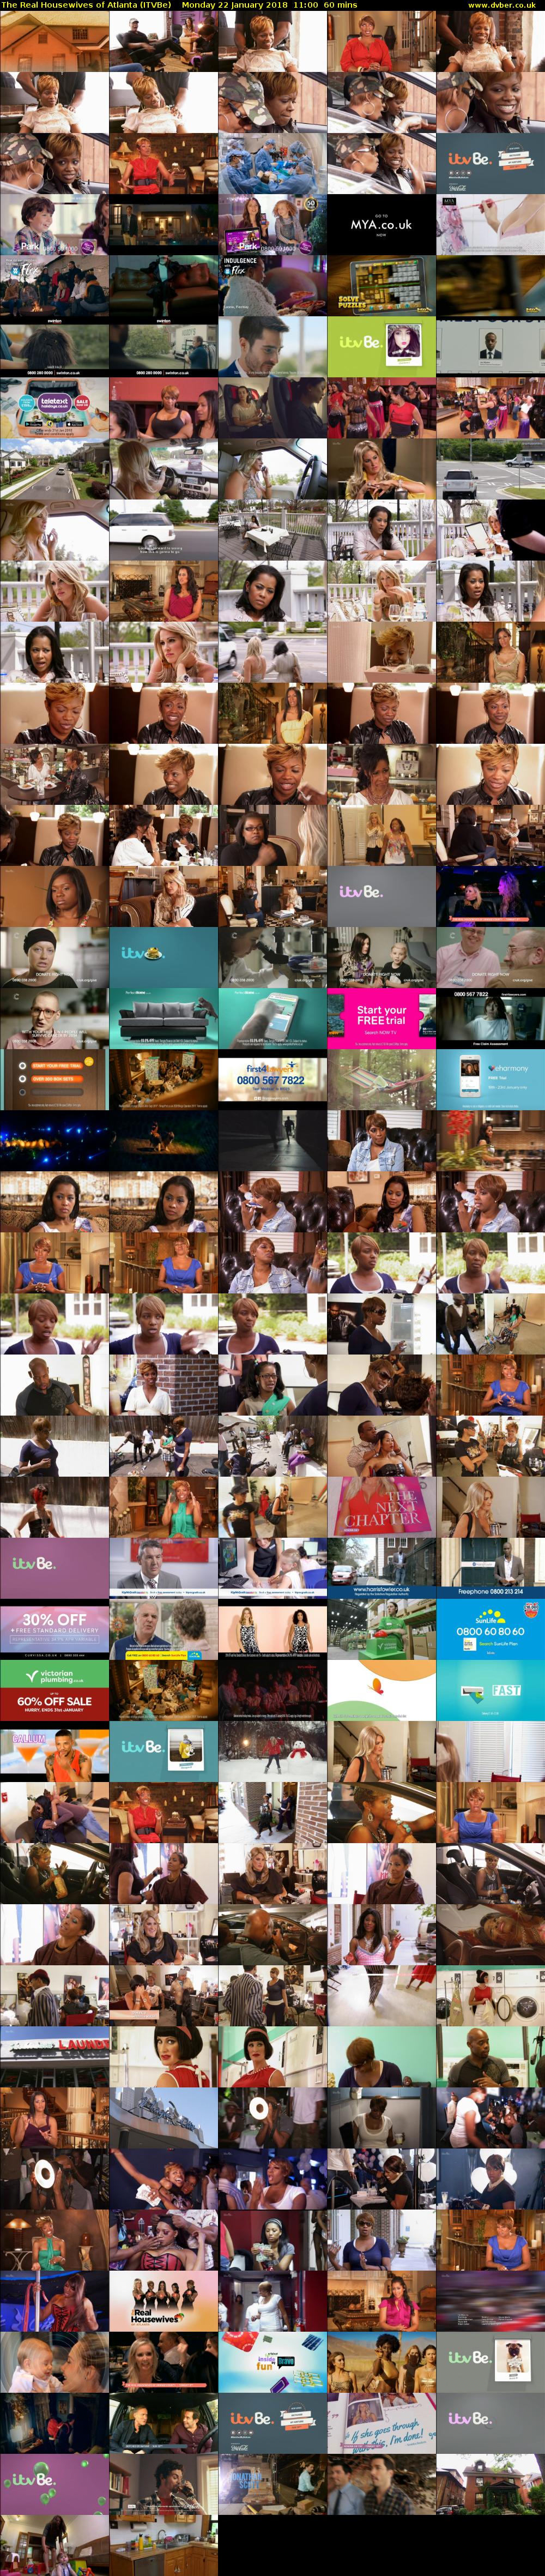 The Real Housewives of Atlanta (ITVBe) Monday 22 January 2018 11:00 - 12:00